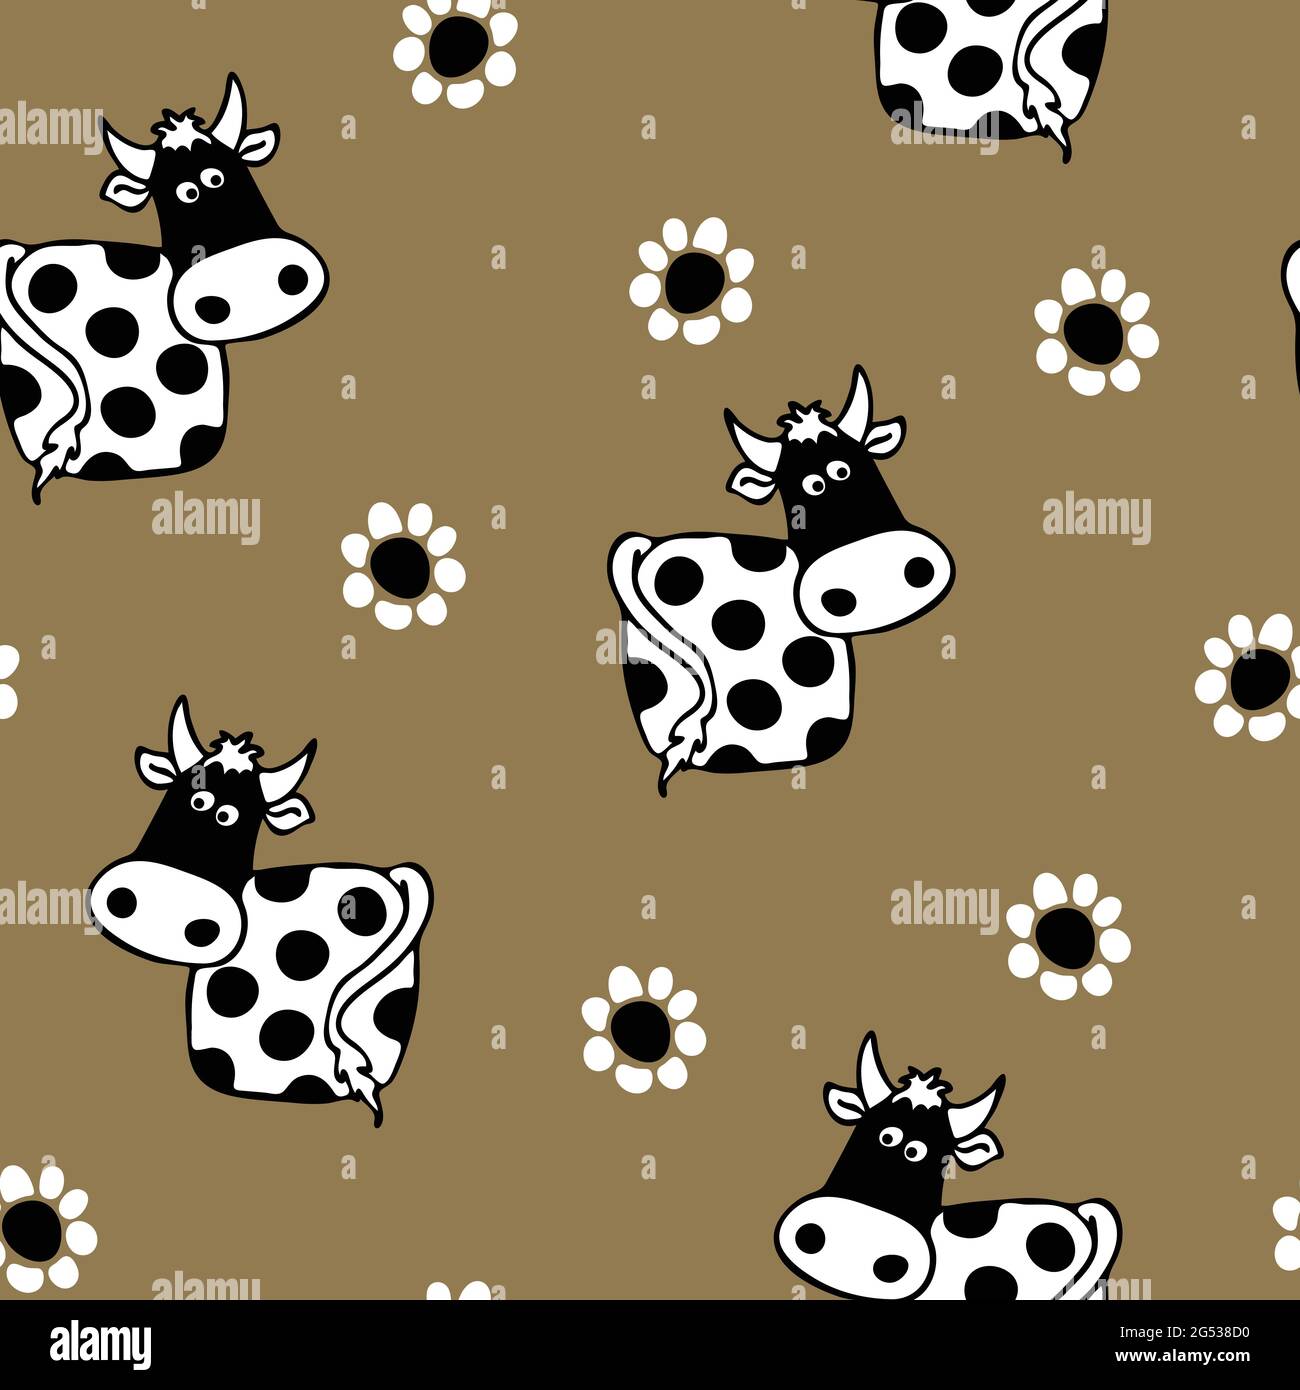 Seamless vector pattern with cow and flowers on grey background. Black and white animal wallpaper design for children. Cute fashion textile. Stock Vector